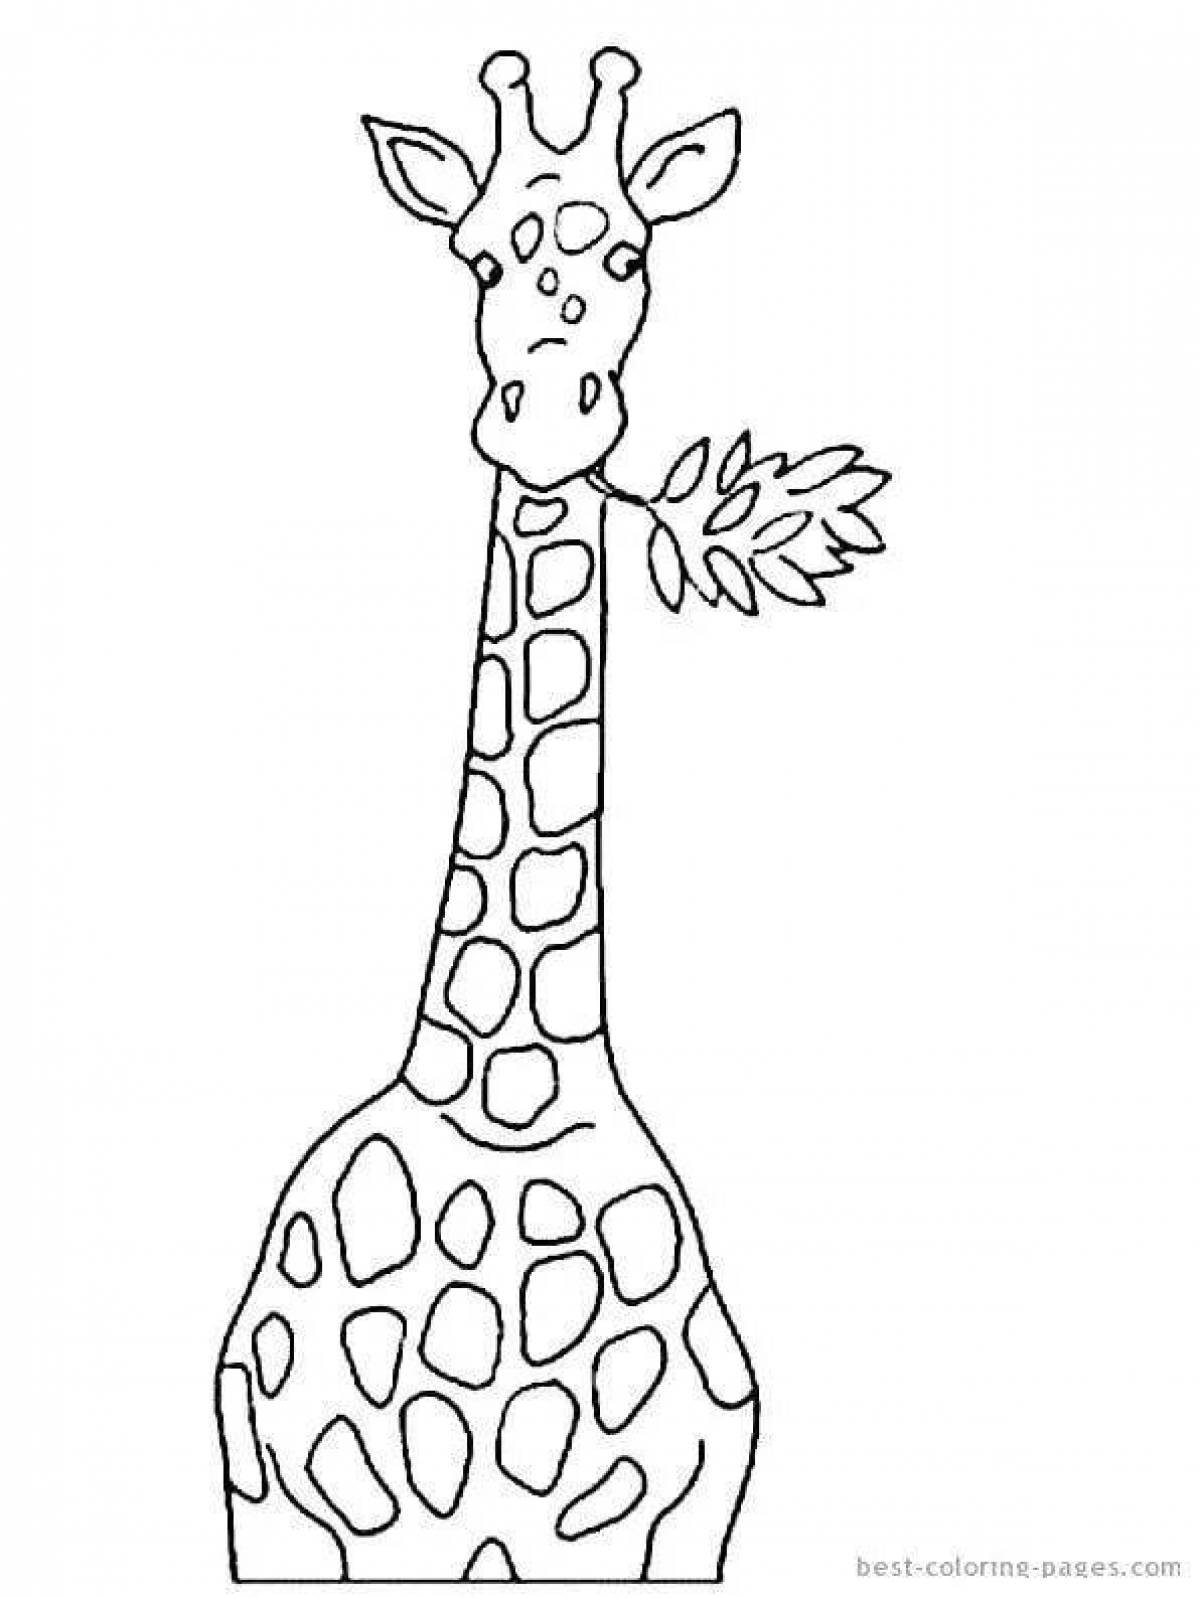 Gorgeous giraffe coloring page